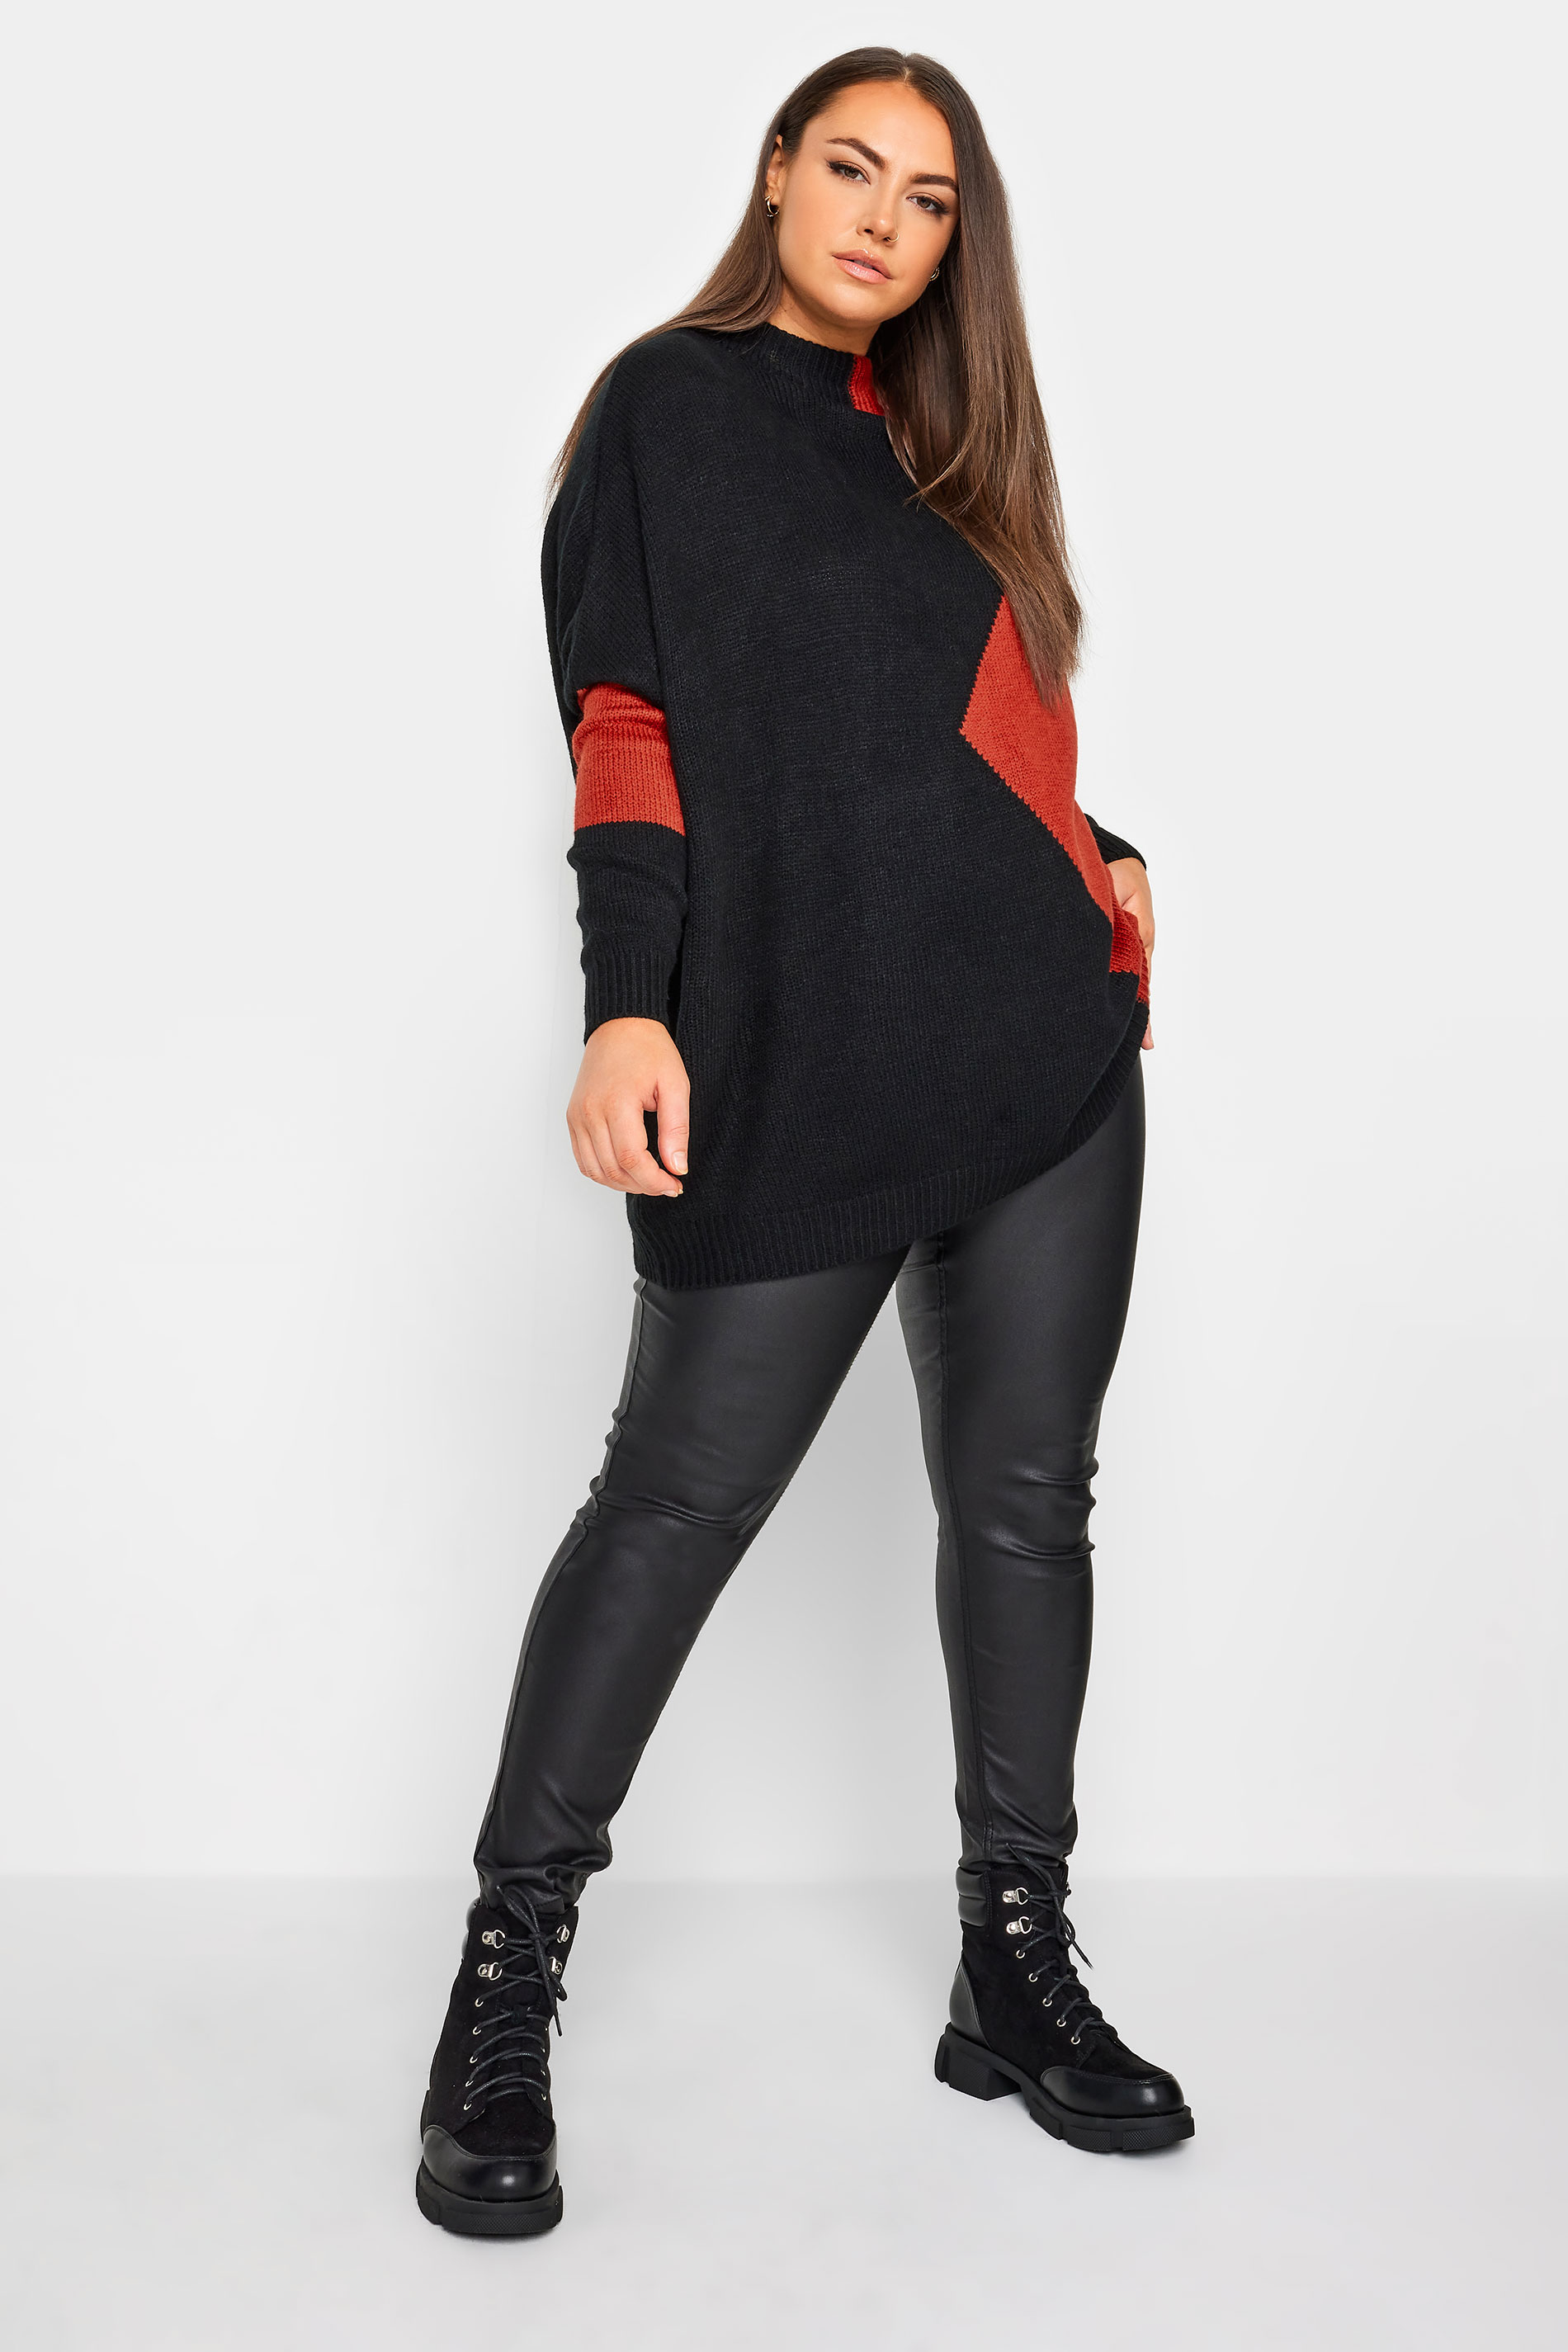 YOURS Plus Size Black & Rust Orange Colourblock Knitted Jumper | Yours Clothing 2